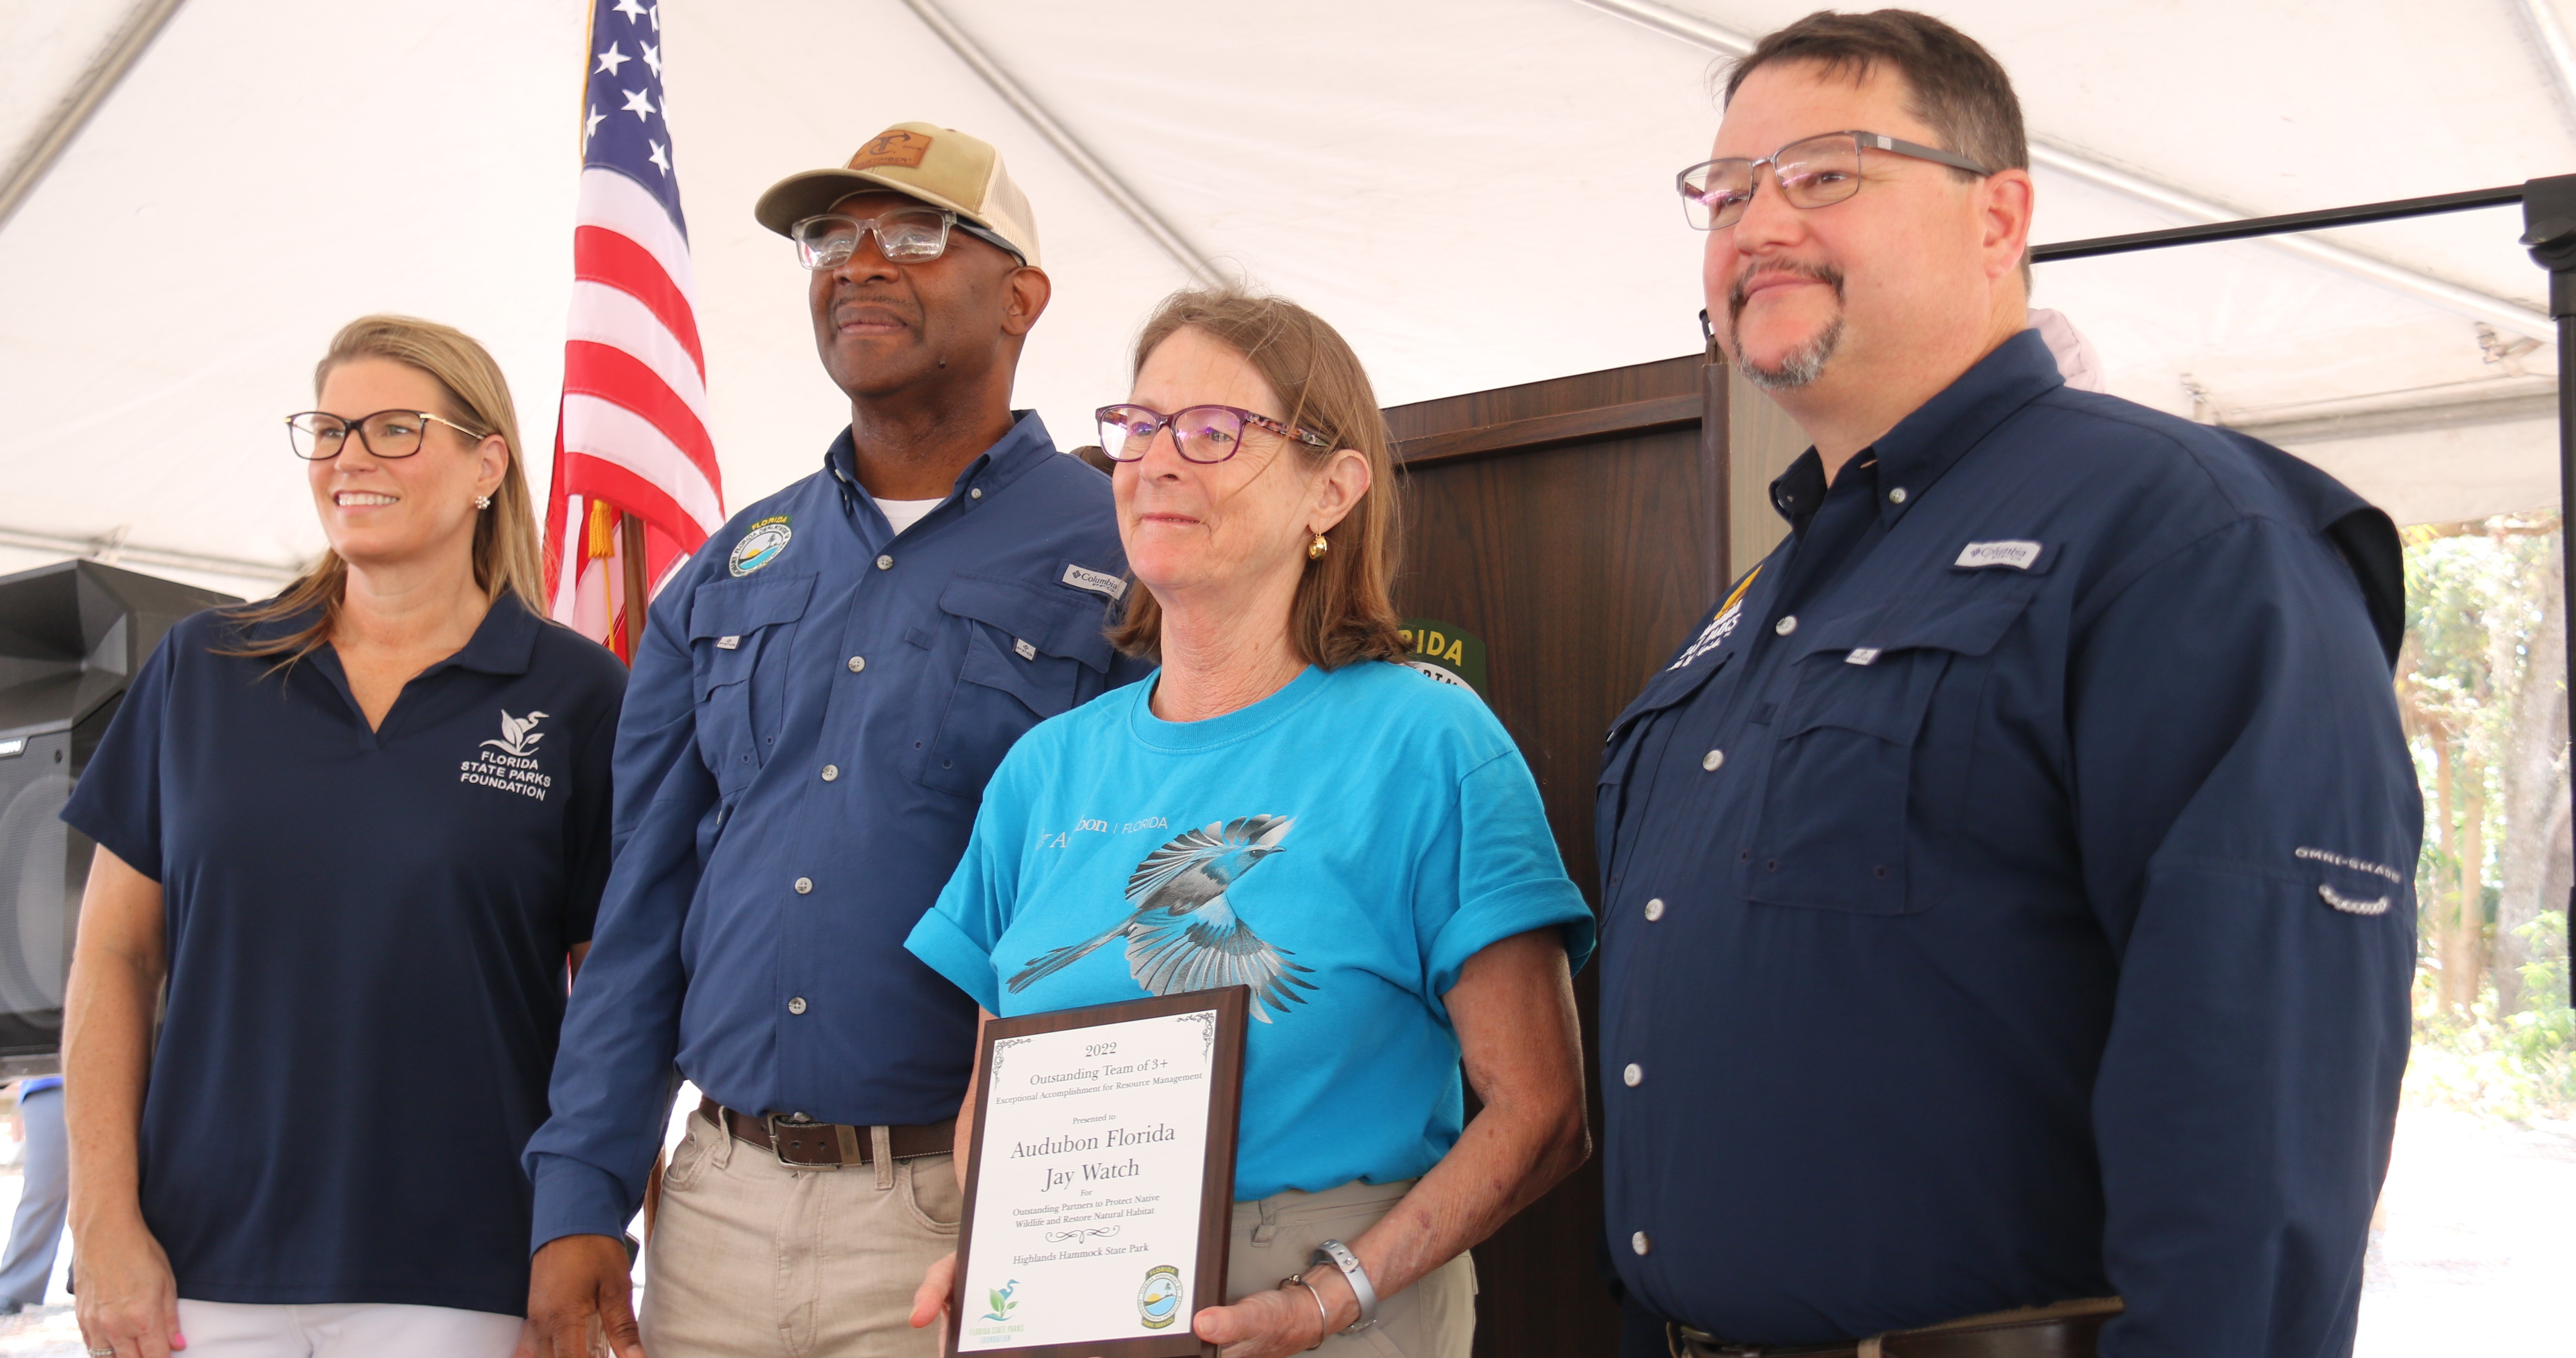 A representative receives the award from Emily Lewis, BJ Givens and Brian Fugate